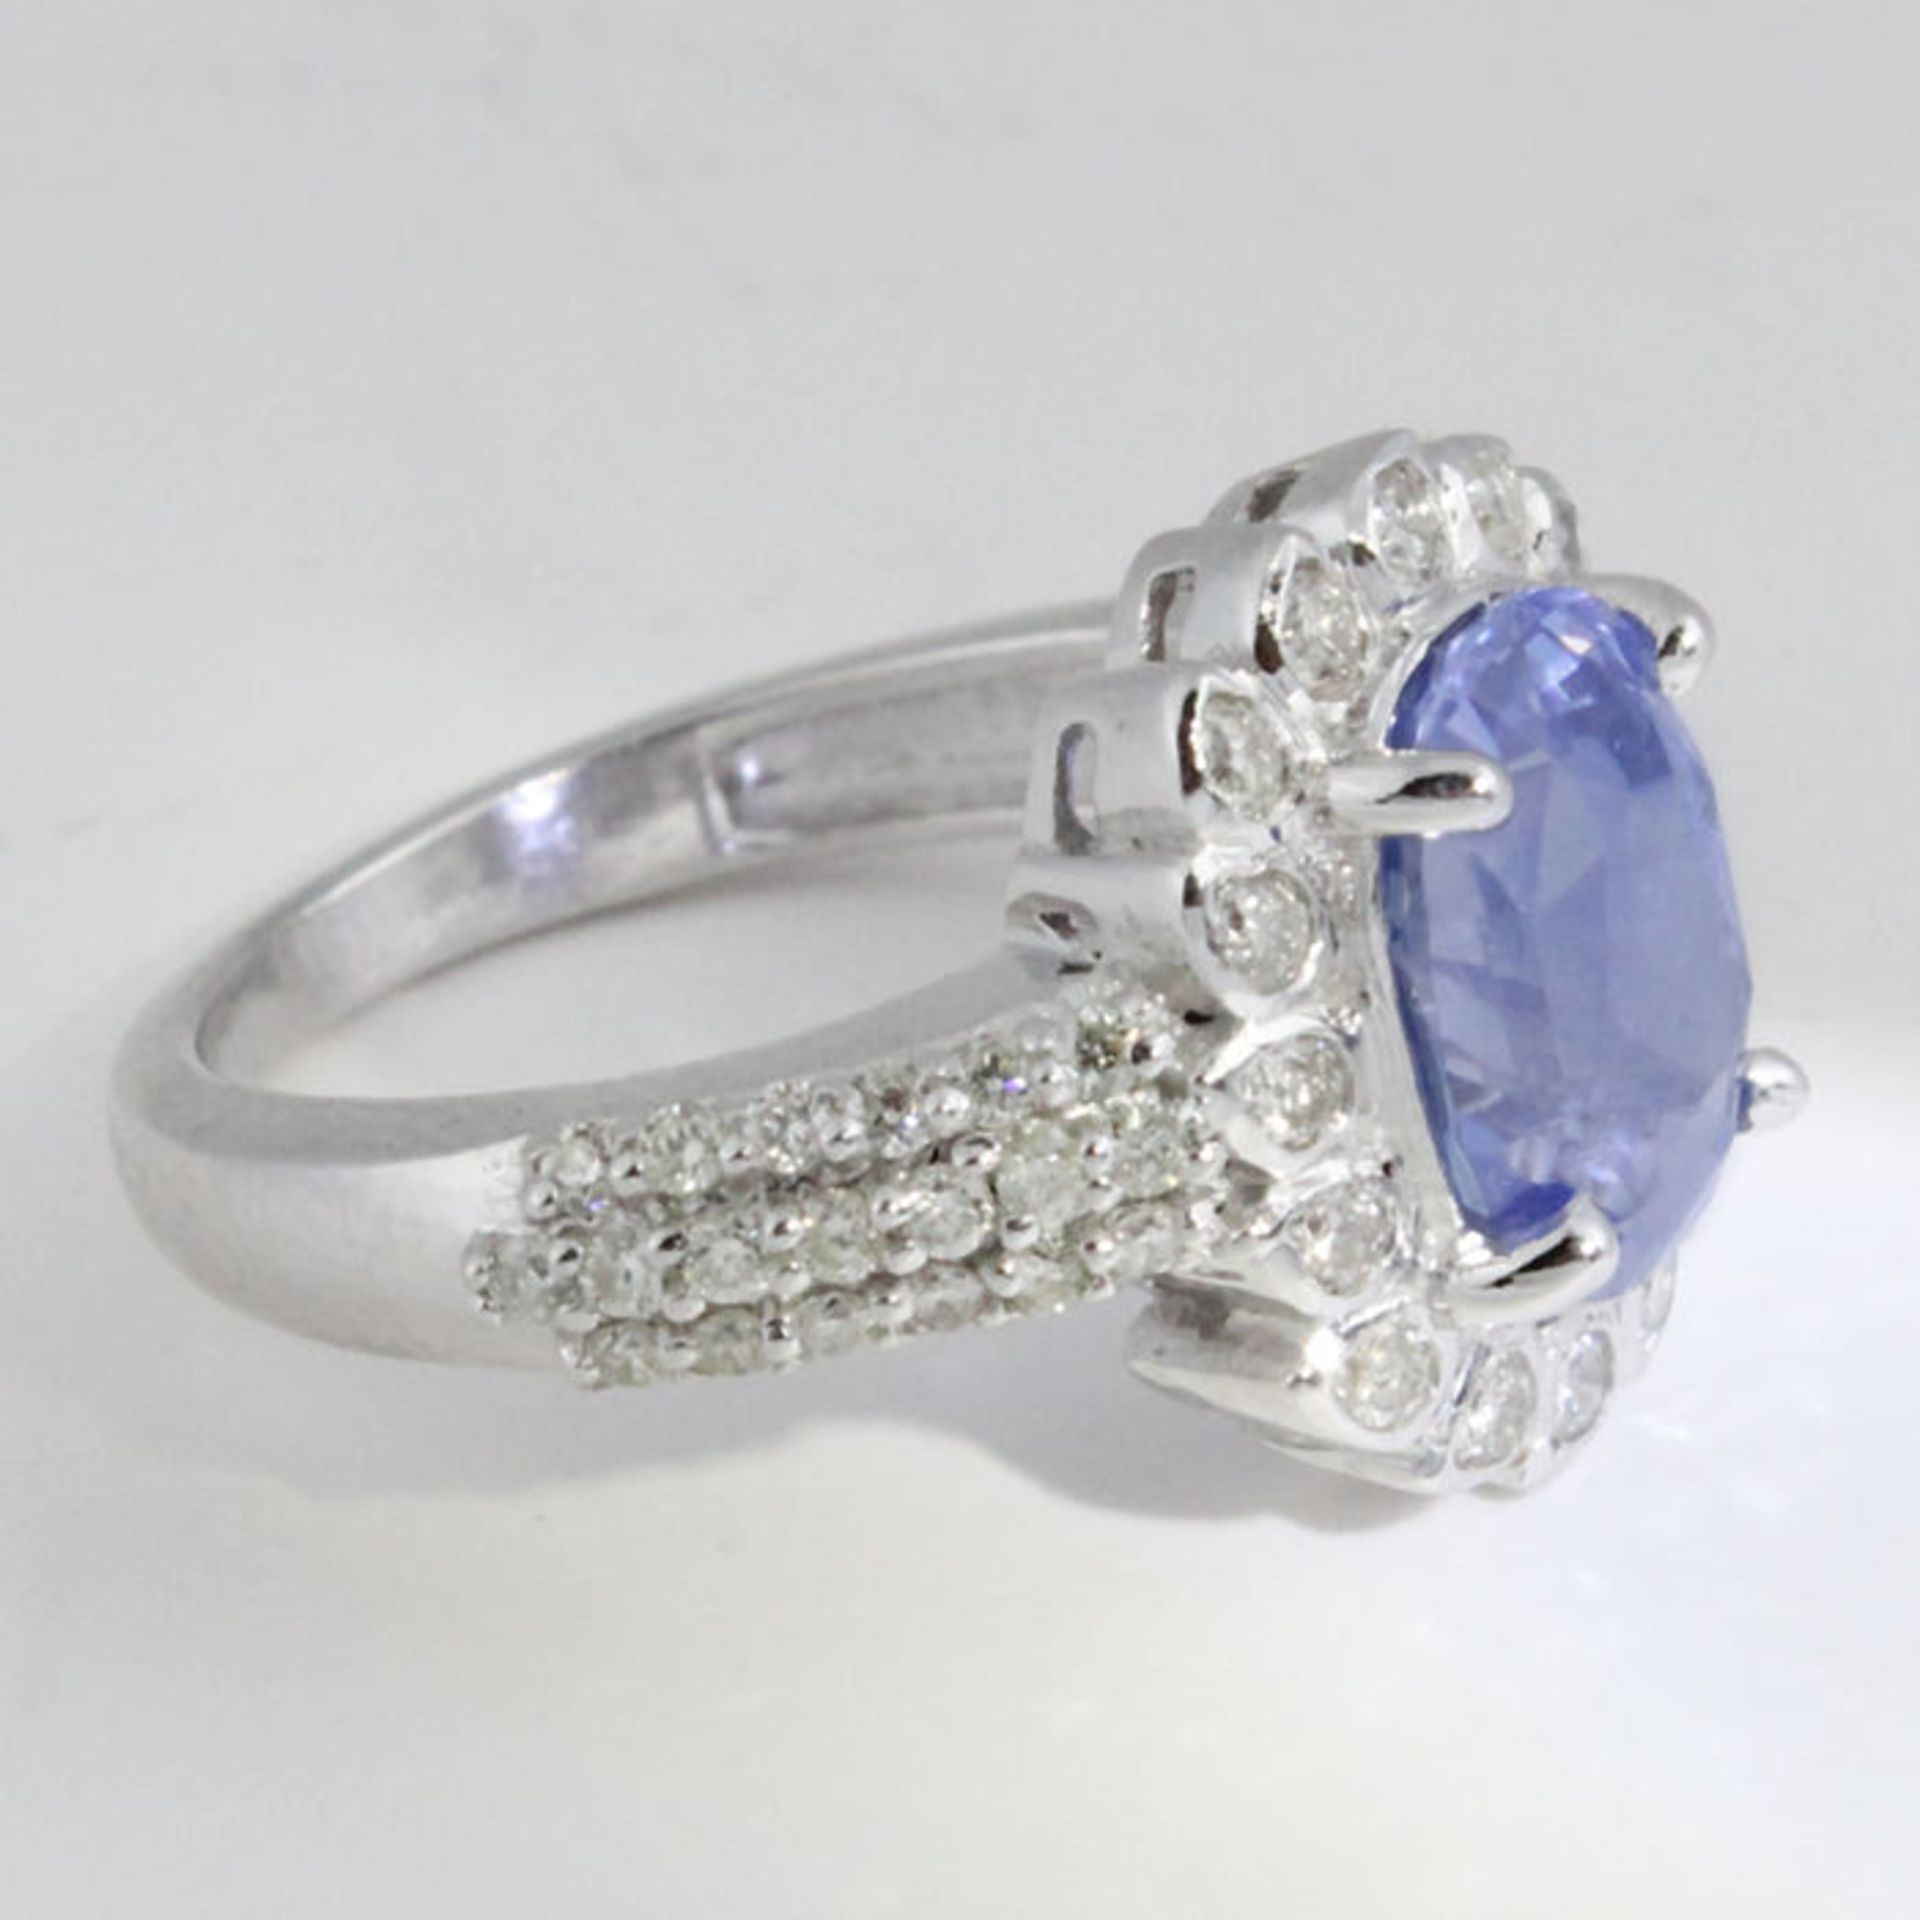 14 K / 585 White Gold Very Exclusive Designer Blue Sapphire (IGI Certified) and Diamond Ring - Image 7 of 7